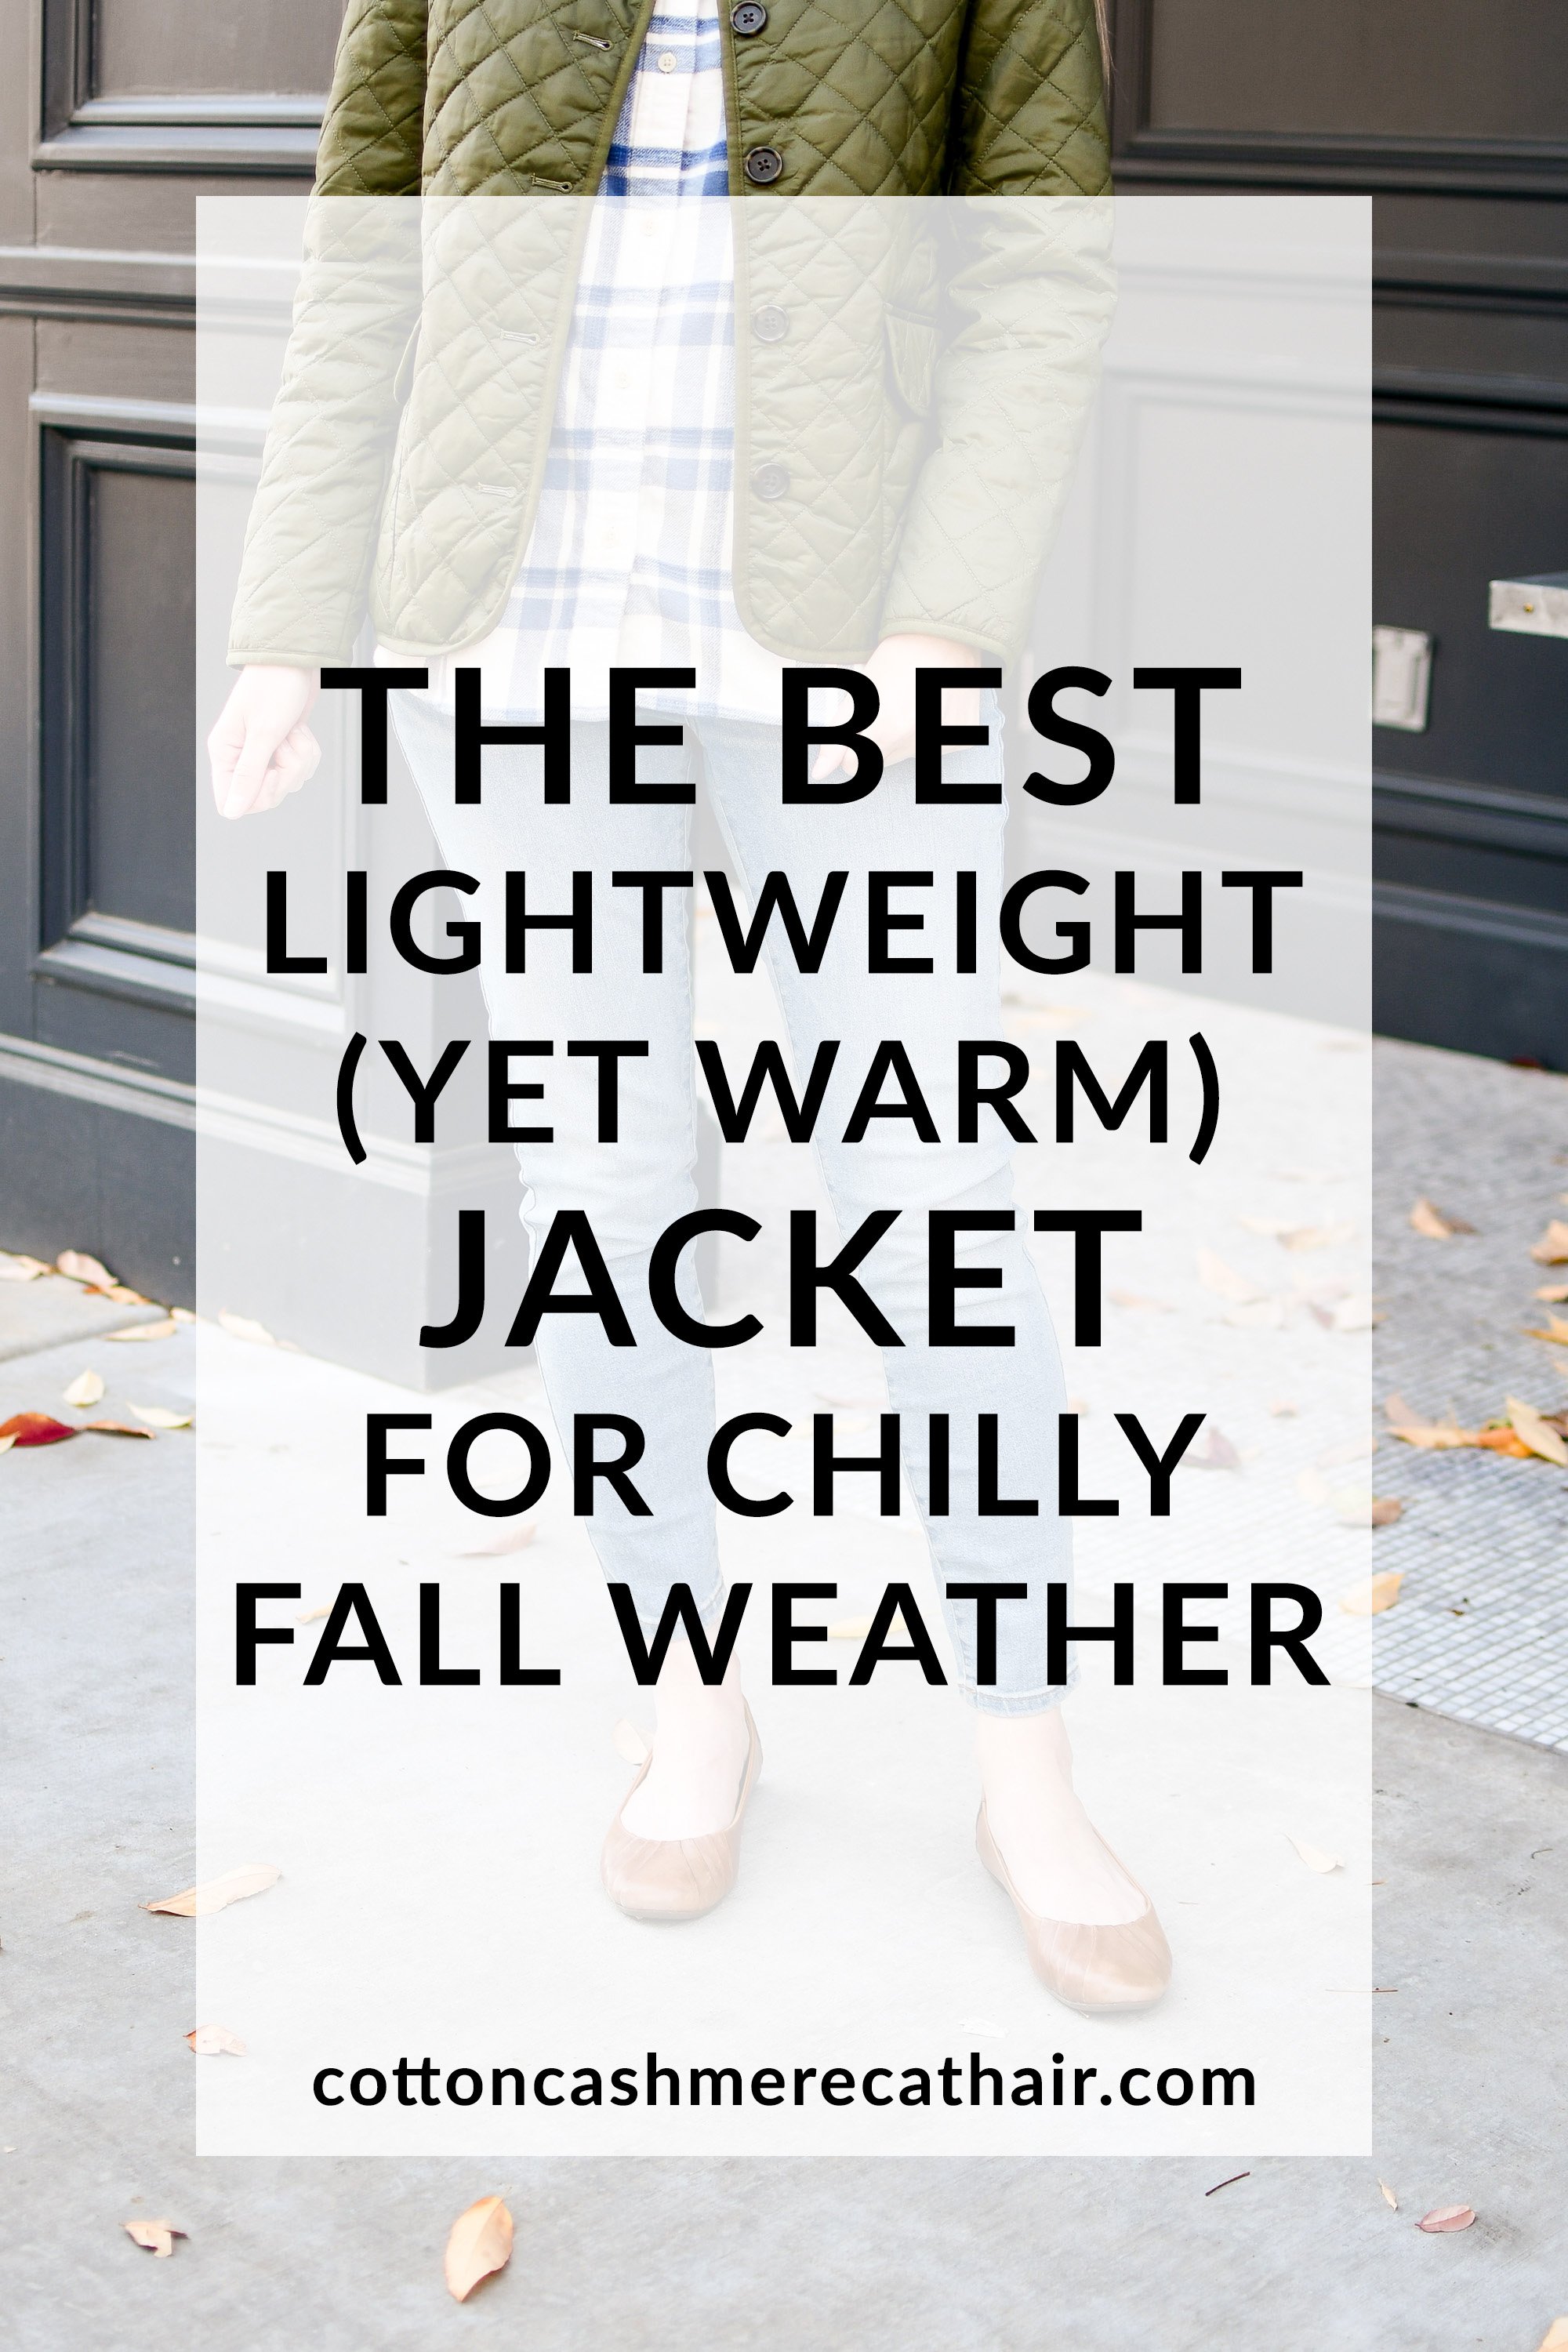 The best lightweight (yet warm) jacket for chilly fall weather